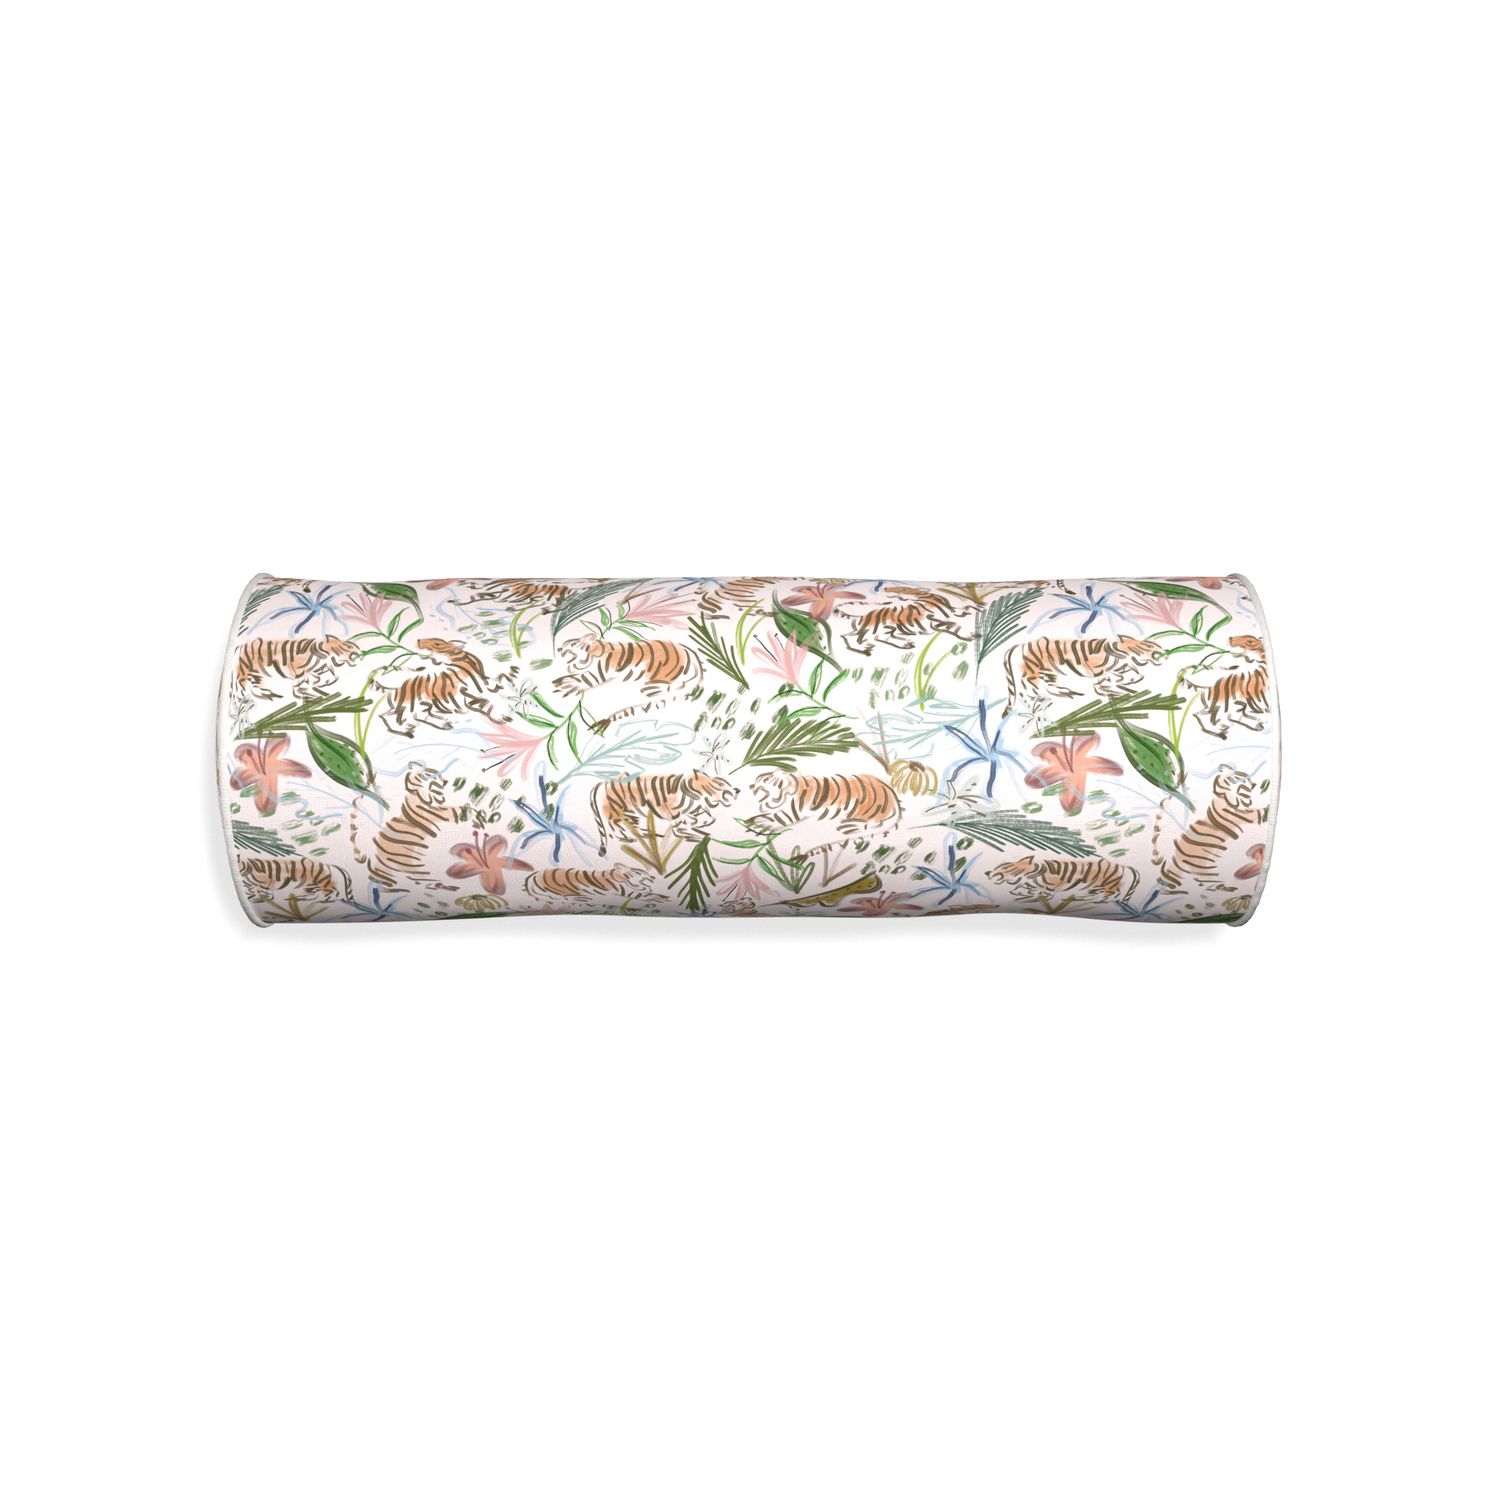 Bolster frida pink custom pillow with snow piping on white background